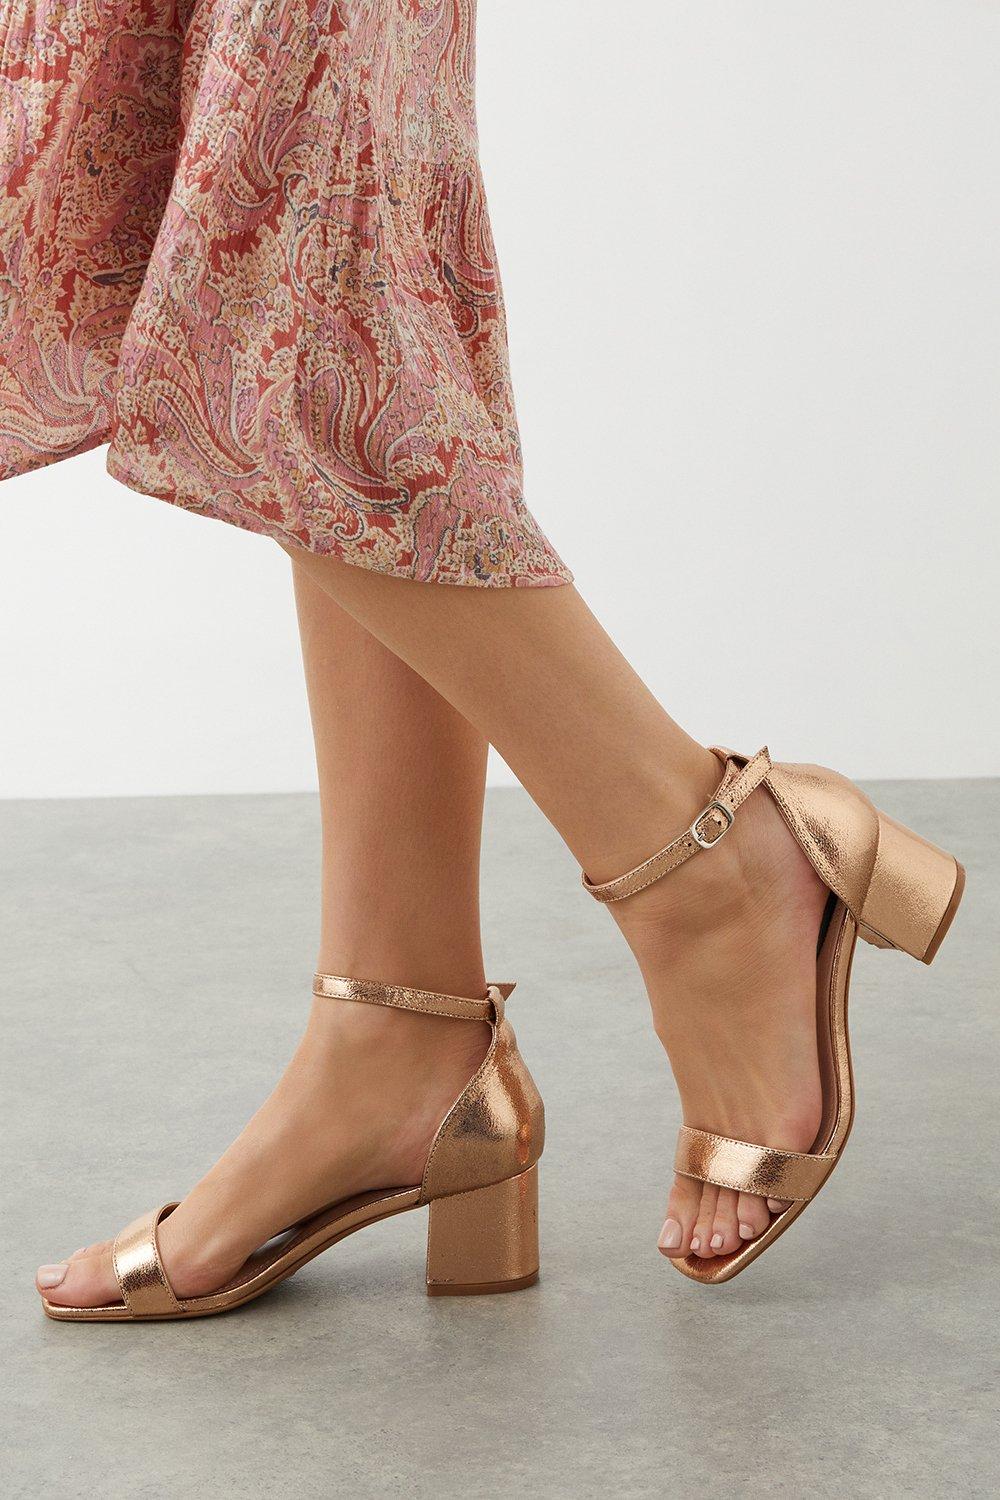 Women’s Sammy Low Block Barely There Heels - rose gold - 3